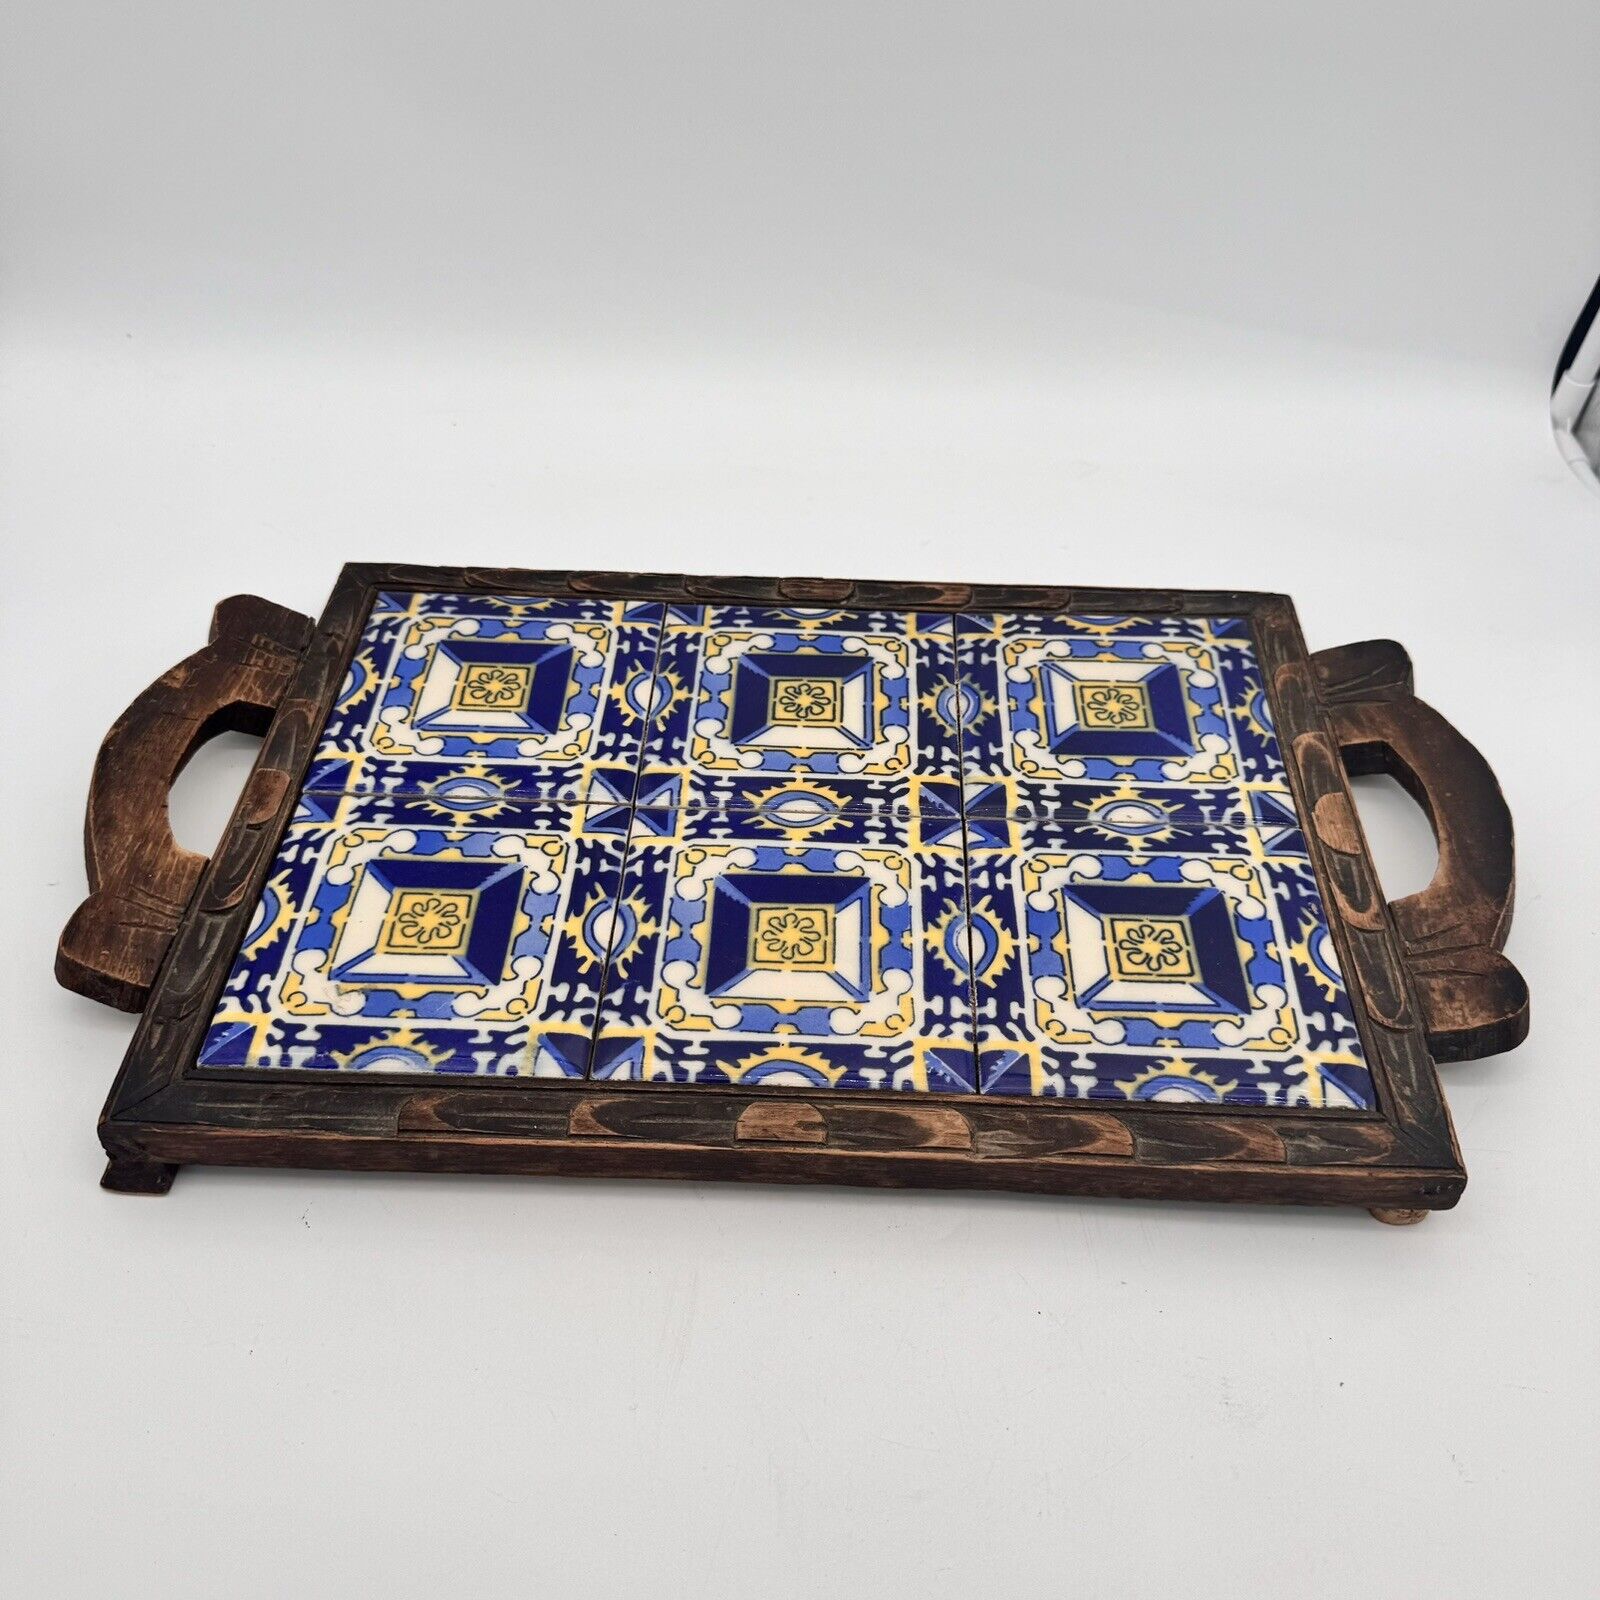 Mexican Art Tile Carved Wood Serving Tray 18 X 10.5” MCM Dal Tile 6 Tiles Signed